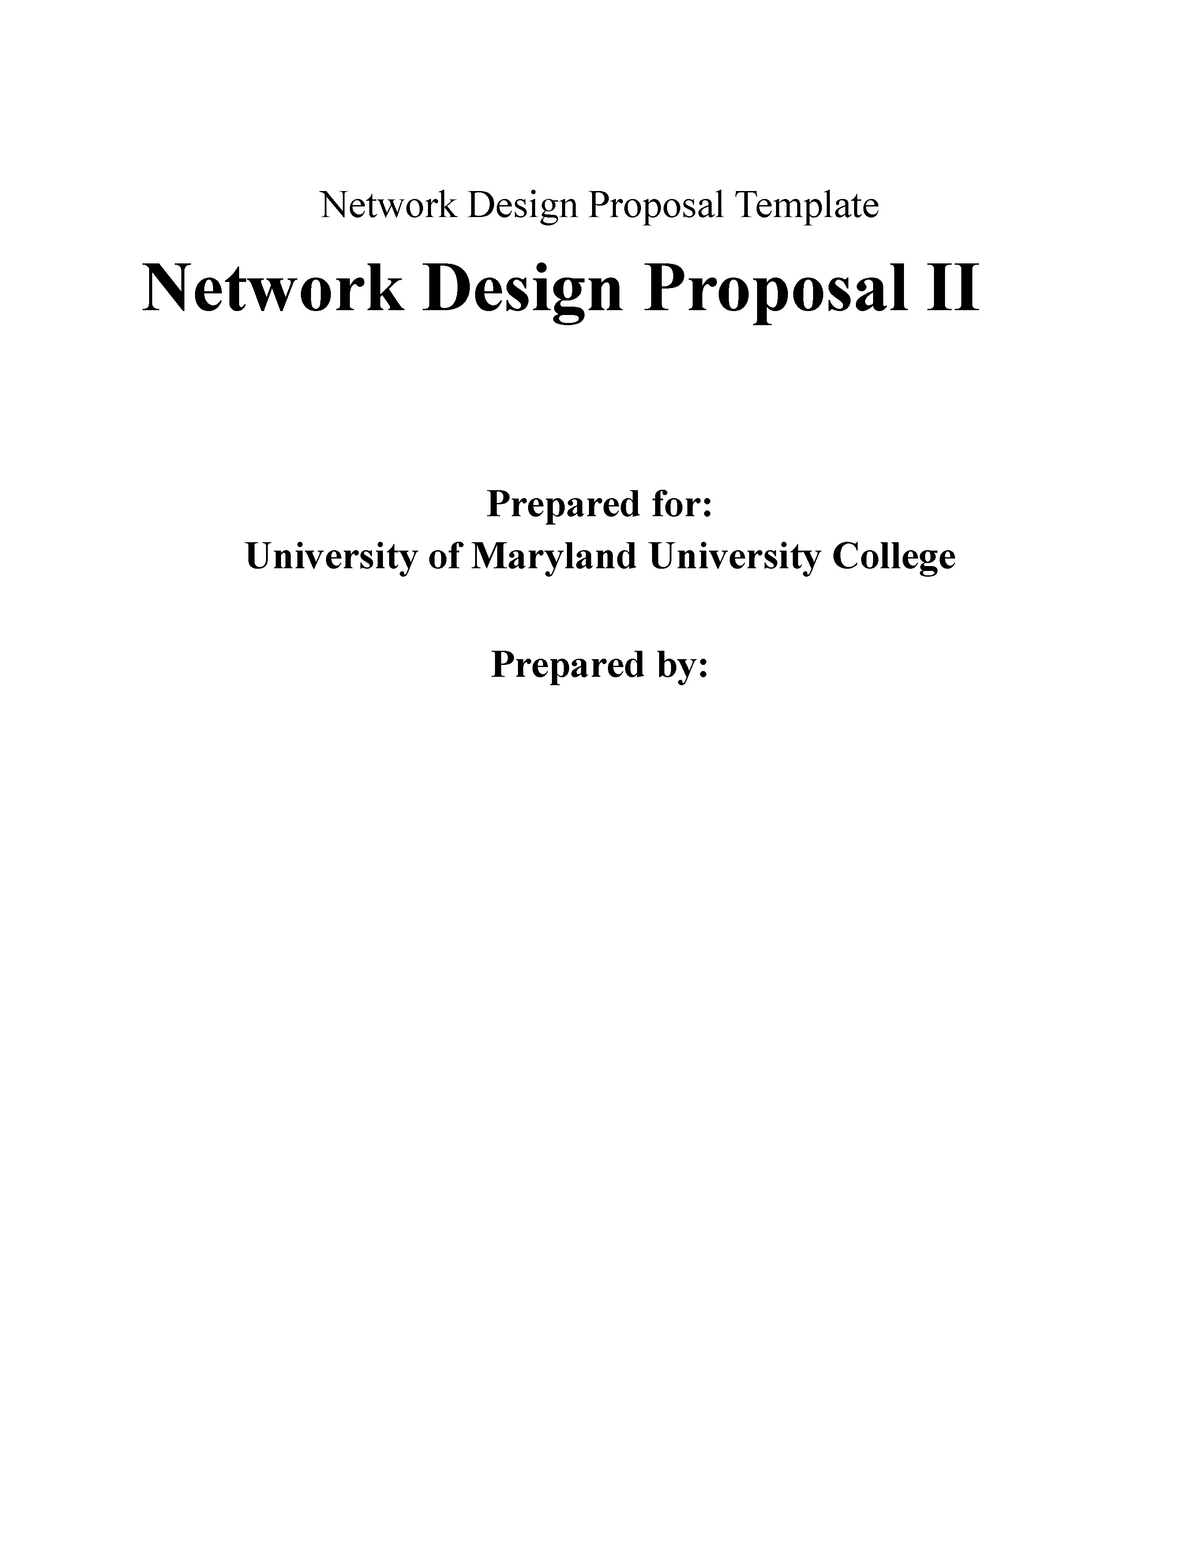 thesis on network design